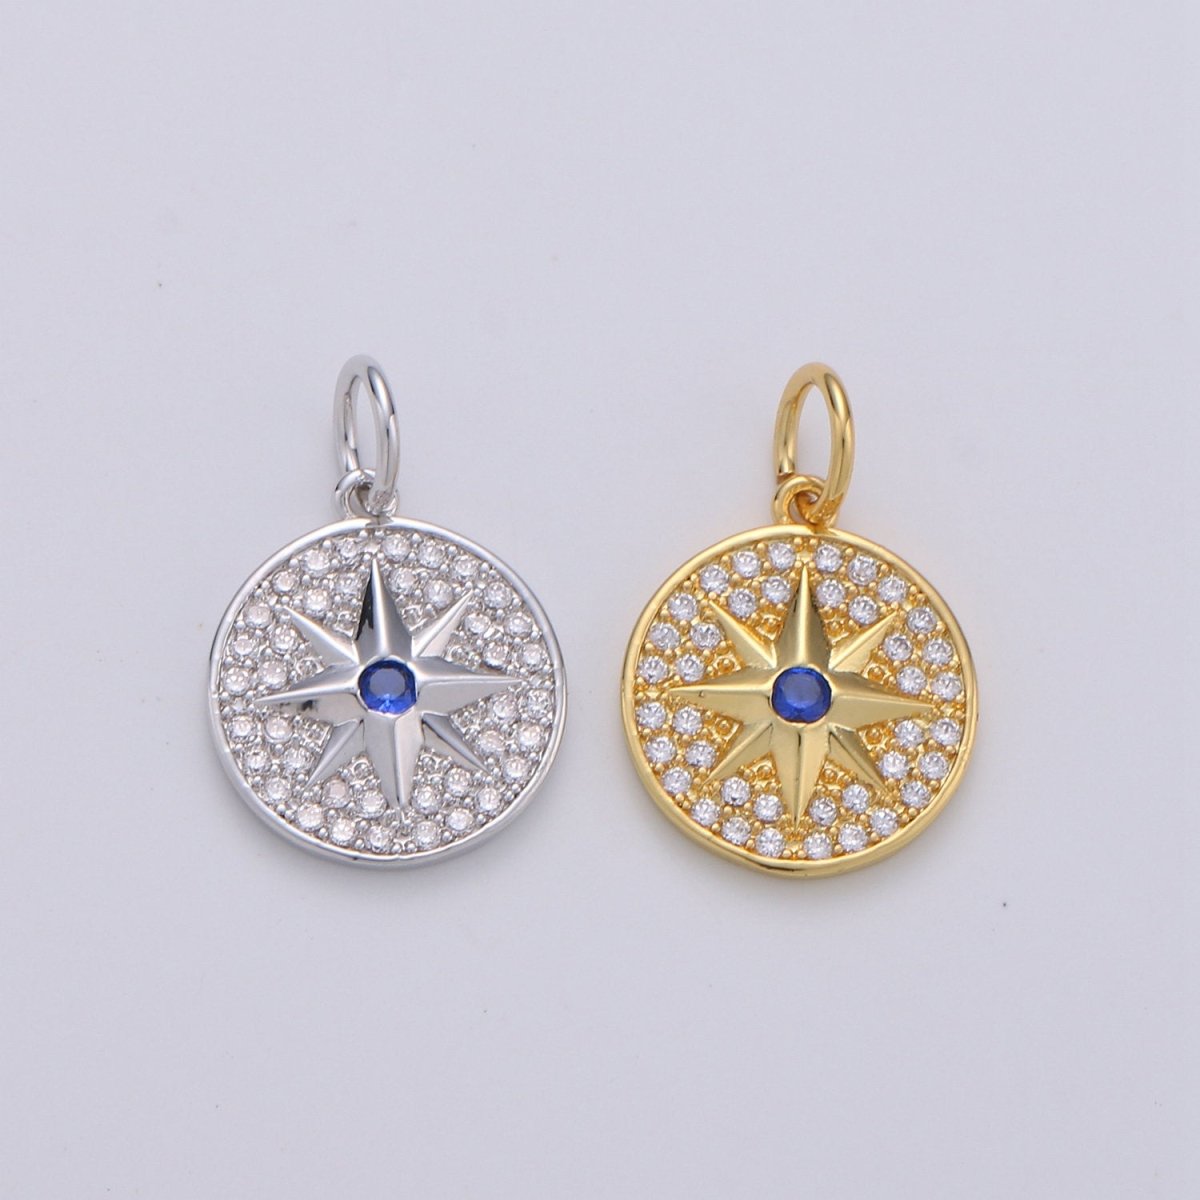 Gold cubic Star charms ,cubic North Star pendants, Coin charm, medallion charm, Celstial star pendants Real Gold Plated / Silver plated D-283 D-284 - DLUXCA